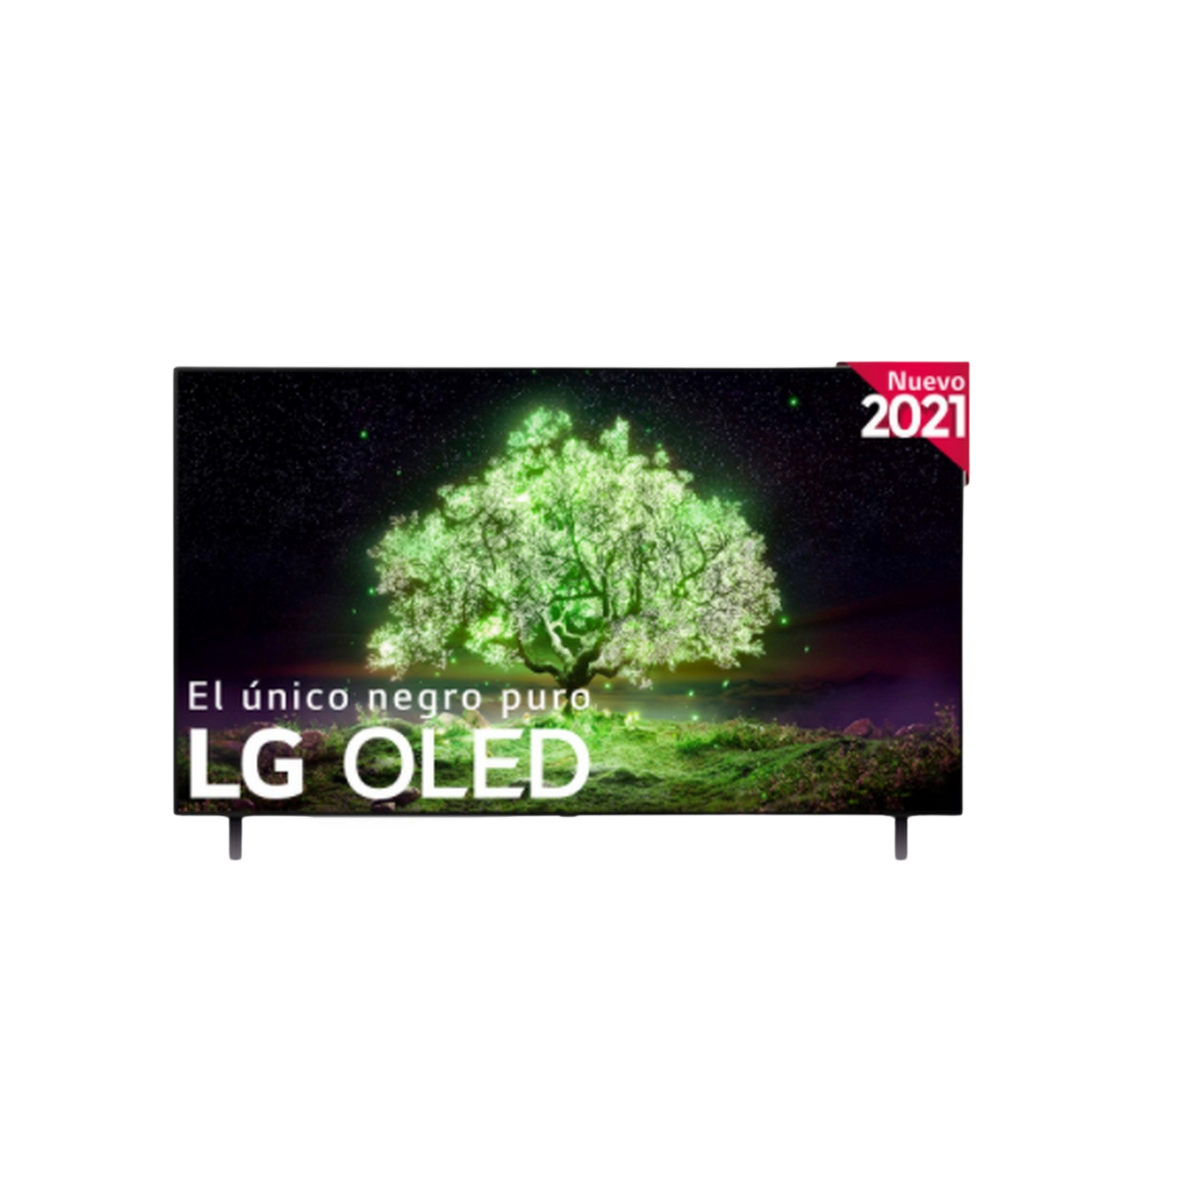 TV OLED 55" - LG OLED55A16LA, SmartTV webOS 6.0, 4K α7 Gen4 con AI, HDR Dolby Vision, Dolby Atmos, Negro